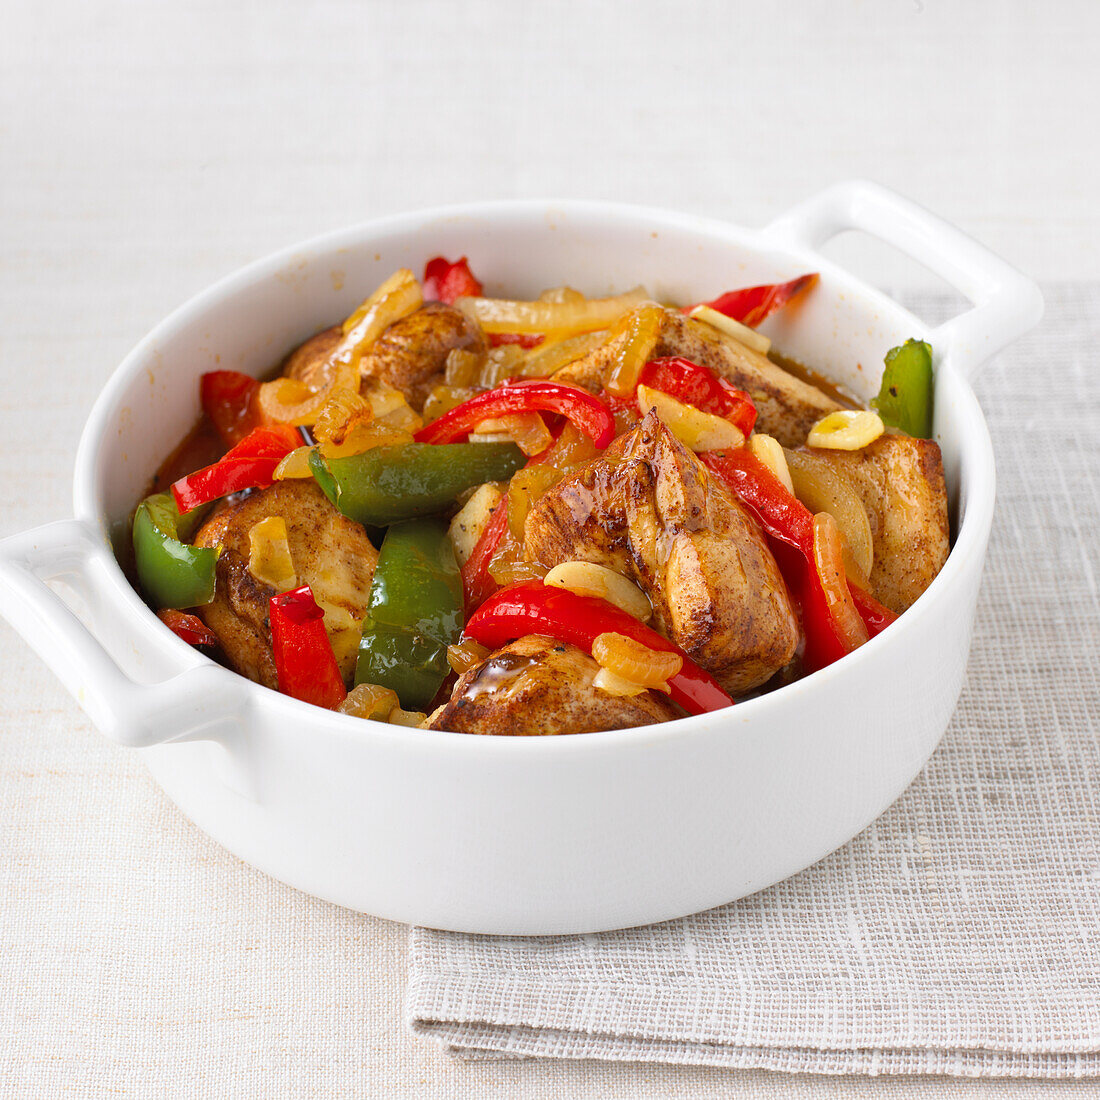 Chicken with cinnamon and peppers